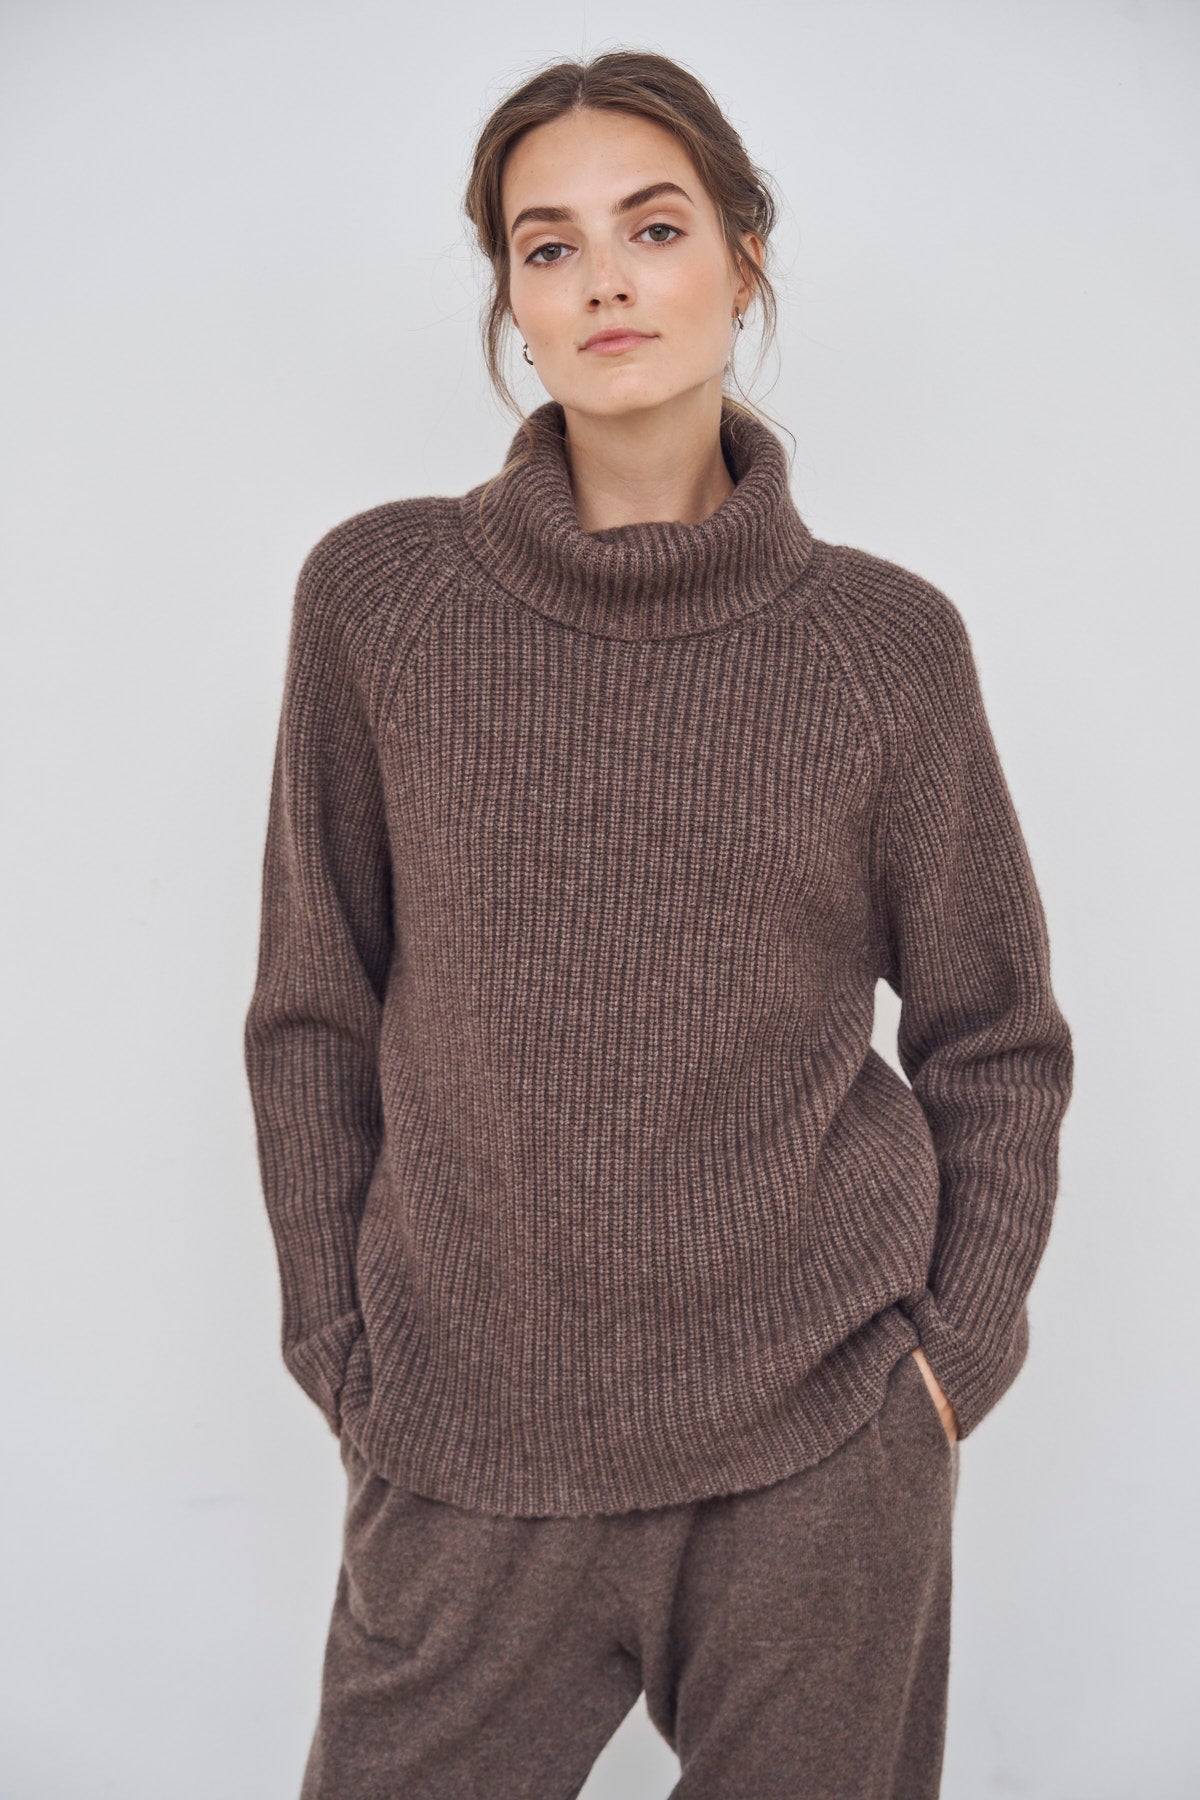 CARE BY ME Kamilla 100% Cashmere Womens Sweater